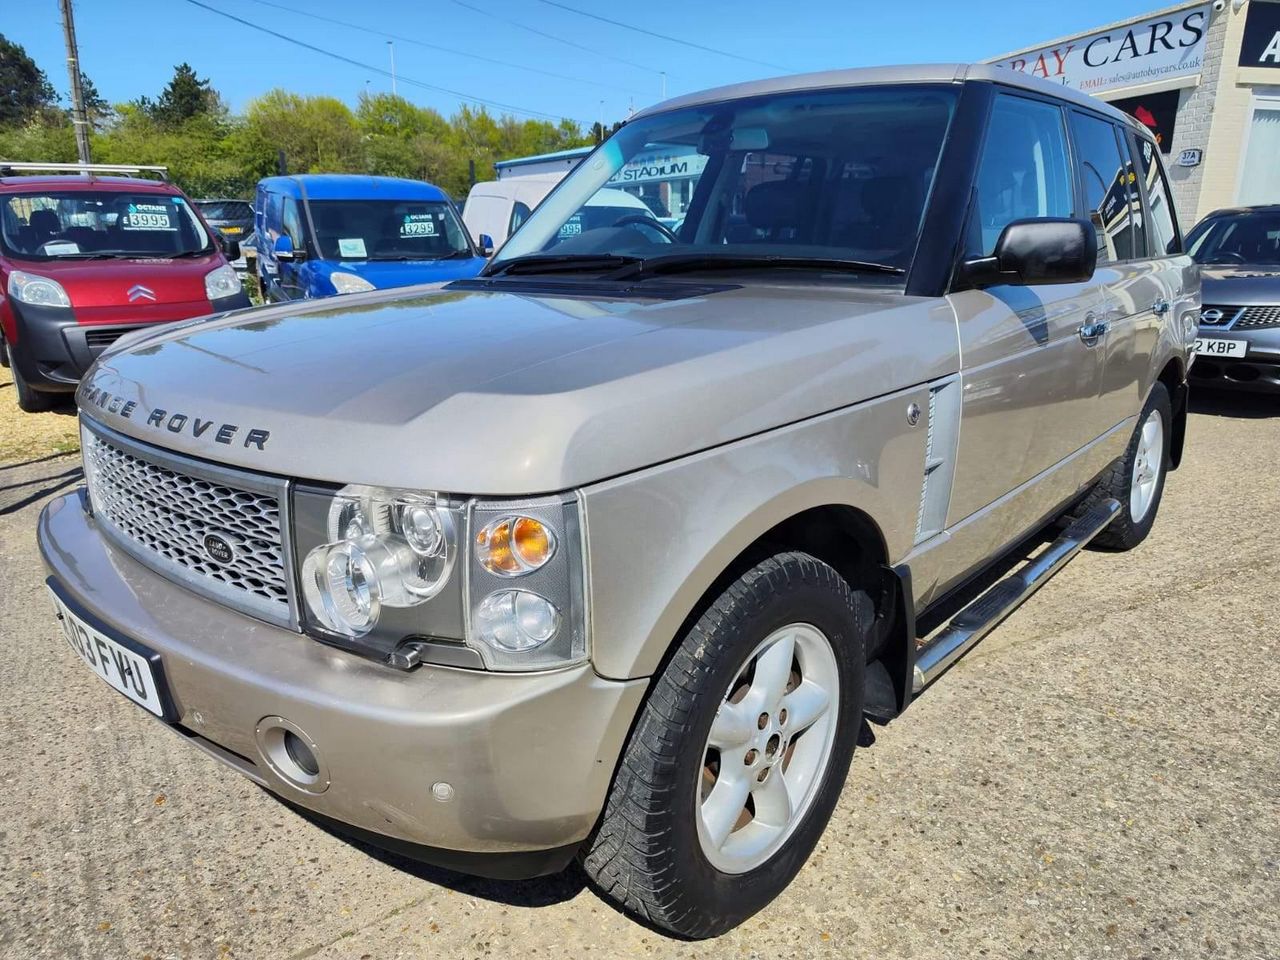 2003 Land Rover Range Rover 3.0 Td6 HSE 5dr - Picture 9 of 32